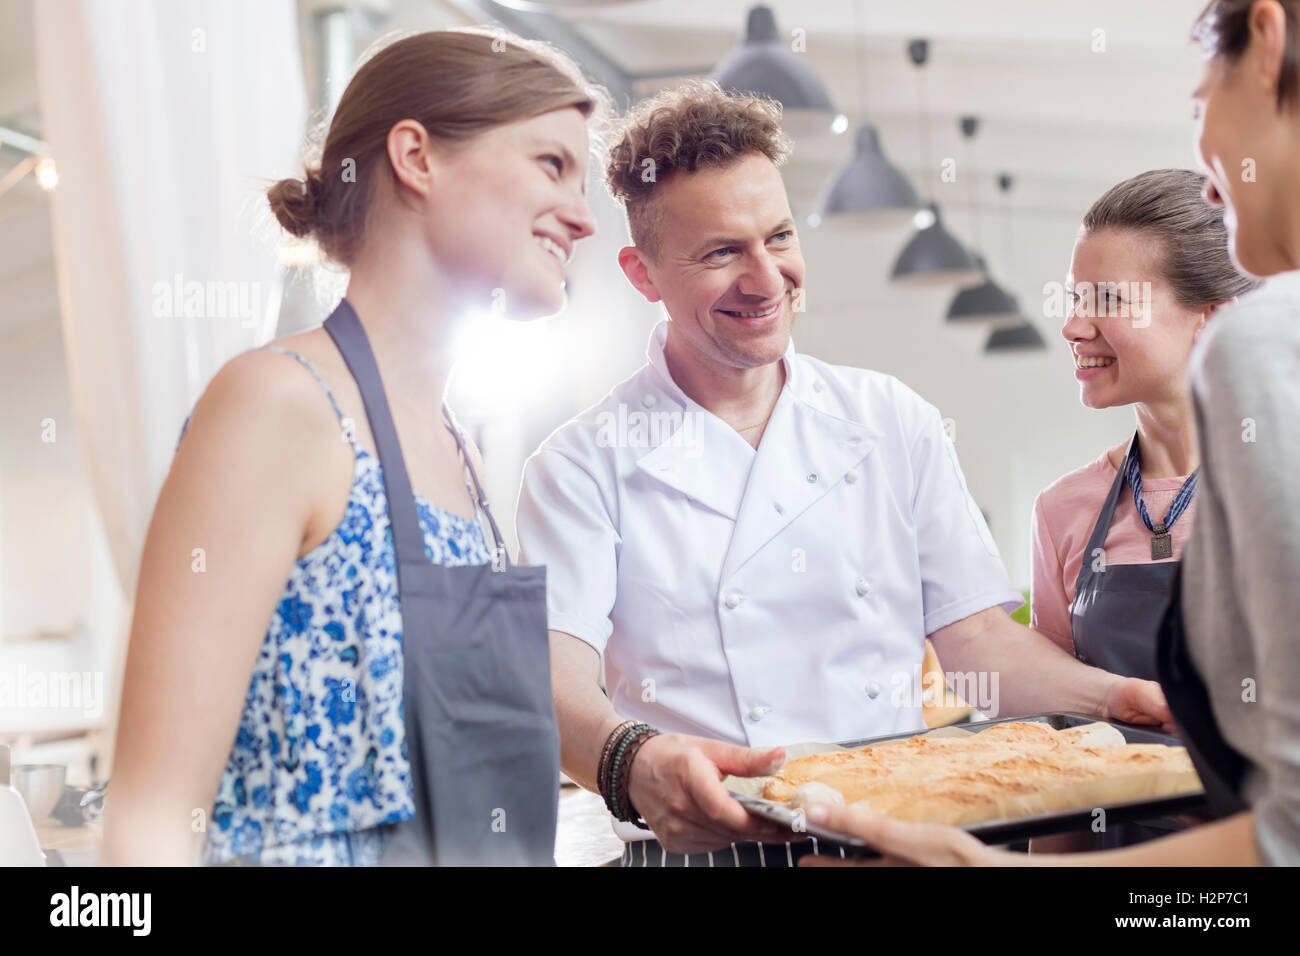 Smiling chef teacher and students in cooking class kitchen Stock Photo